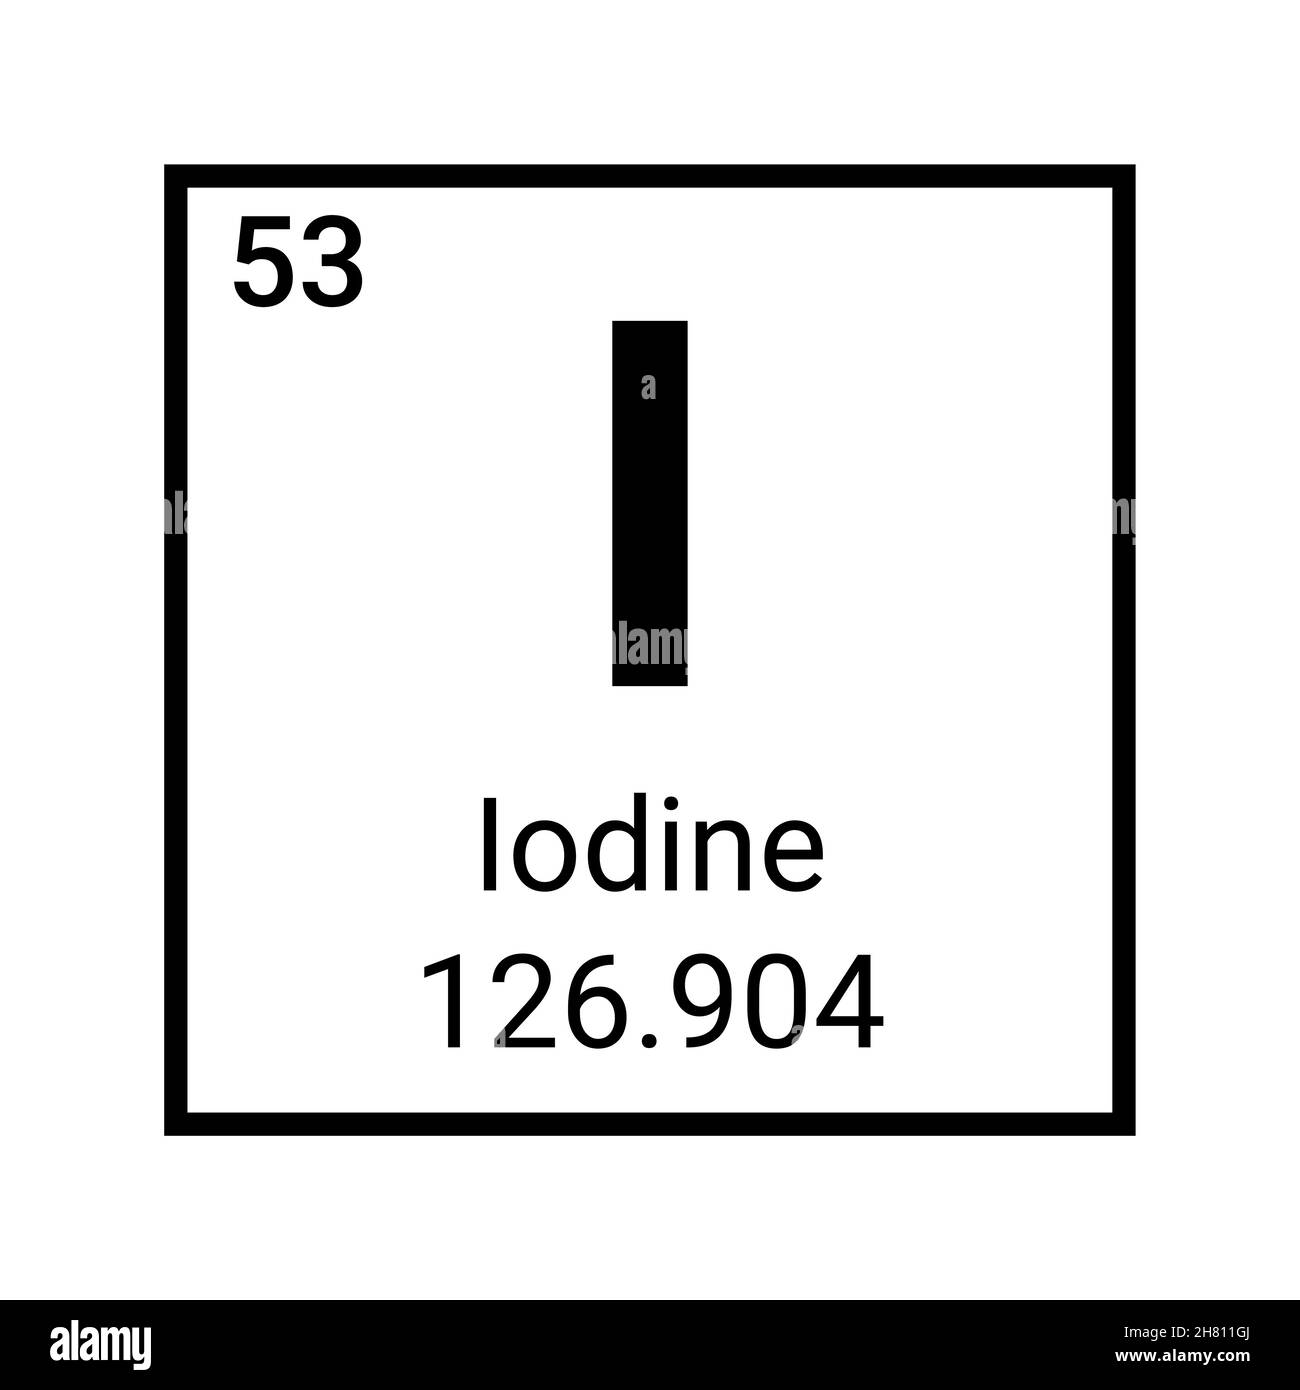 Iodine periodic element table science vector illustration atomic chemistry symbol sign Stock Vector